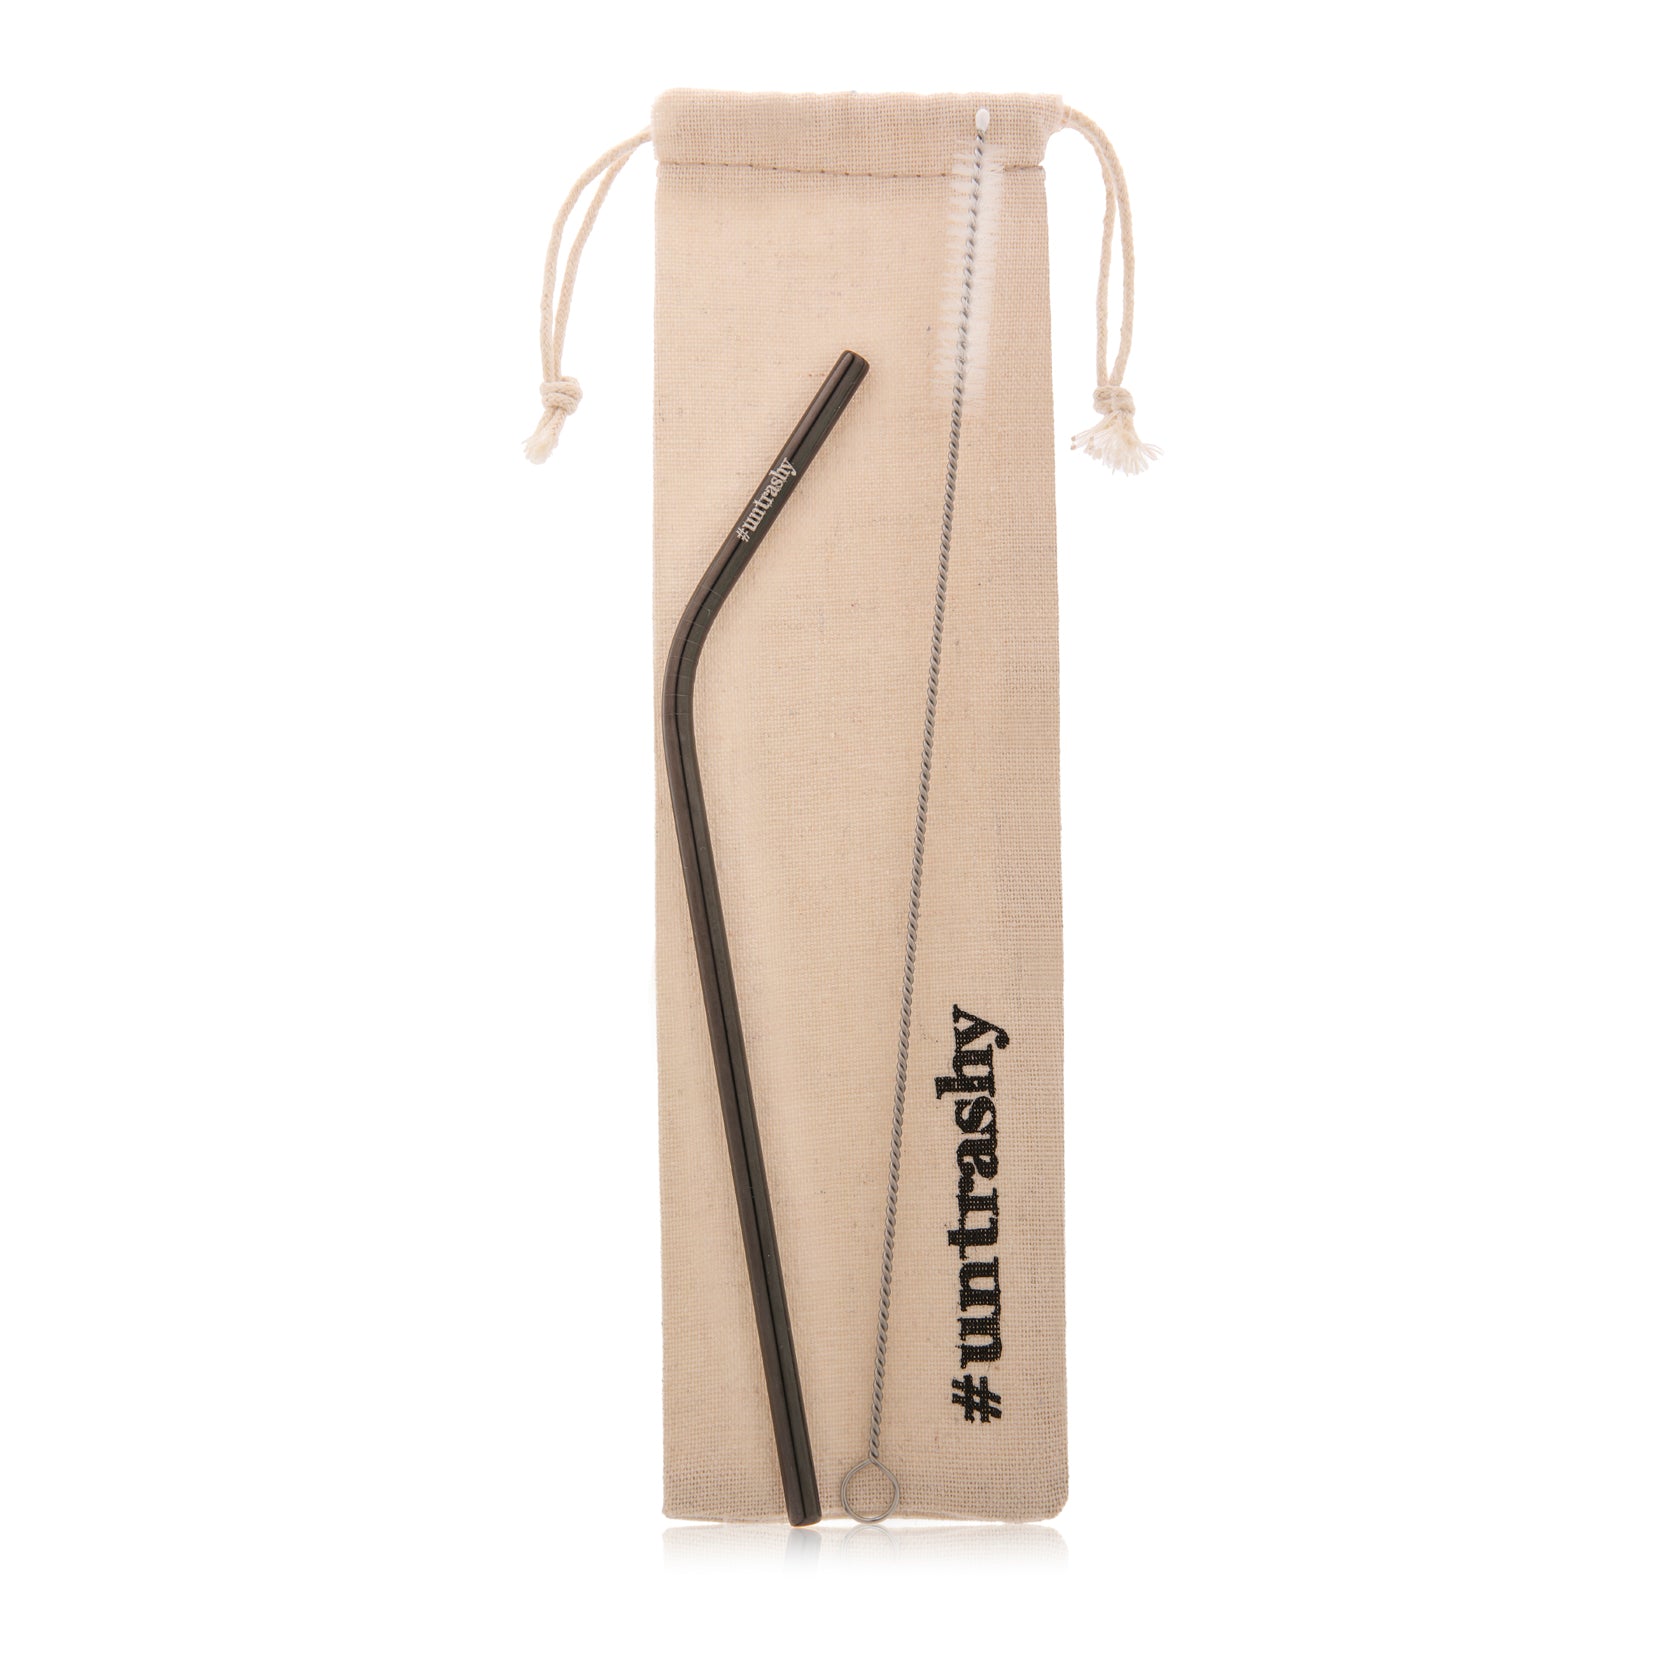 black stainless steel bent straw with linen bag and cleaning brush